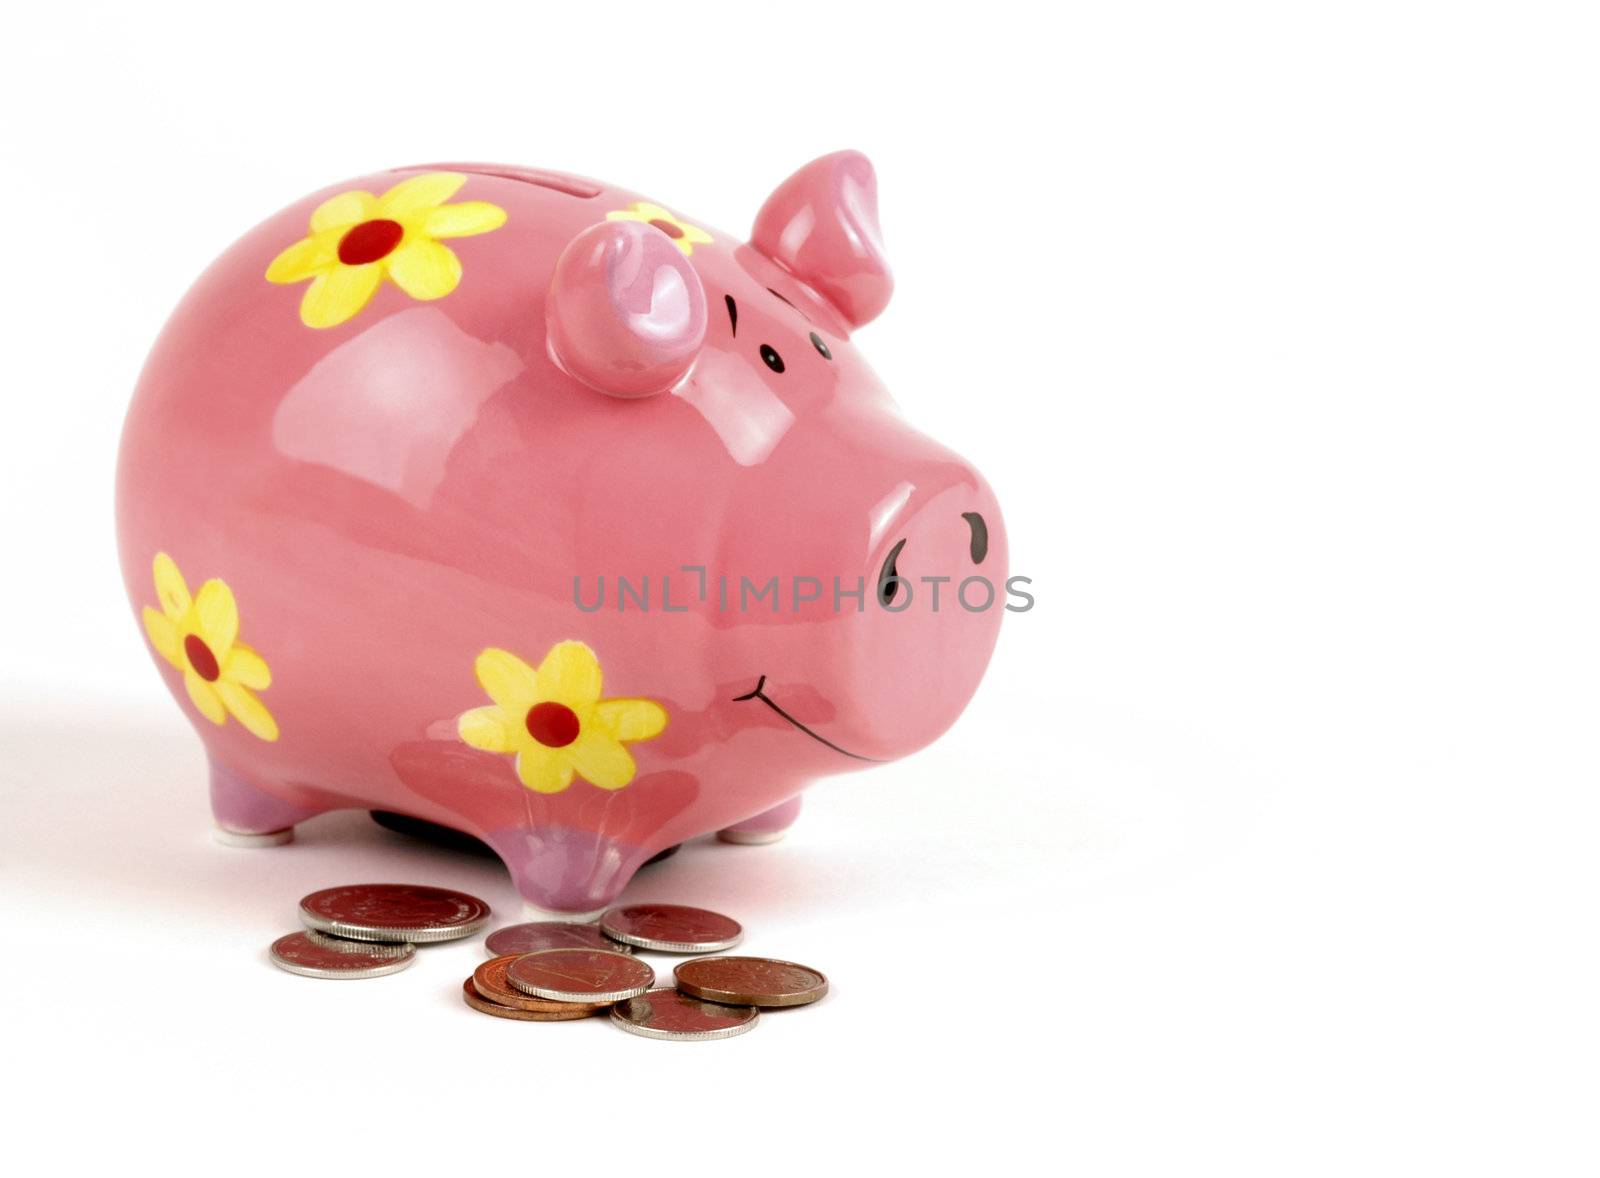 Pink ceramic piggy bank with loose coins around.